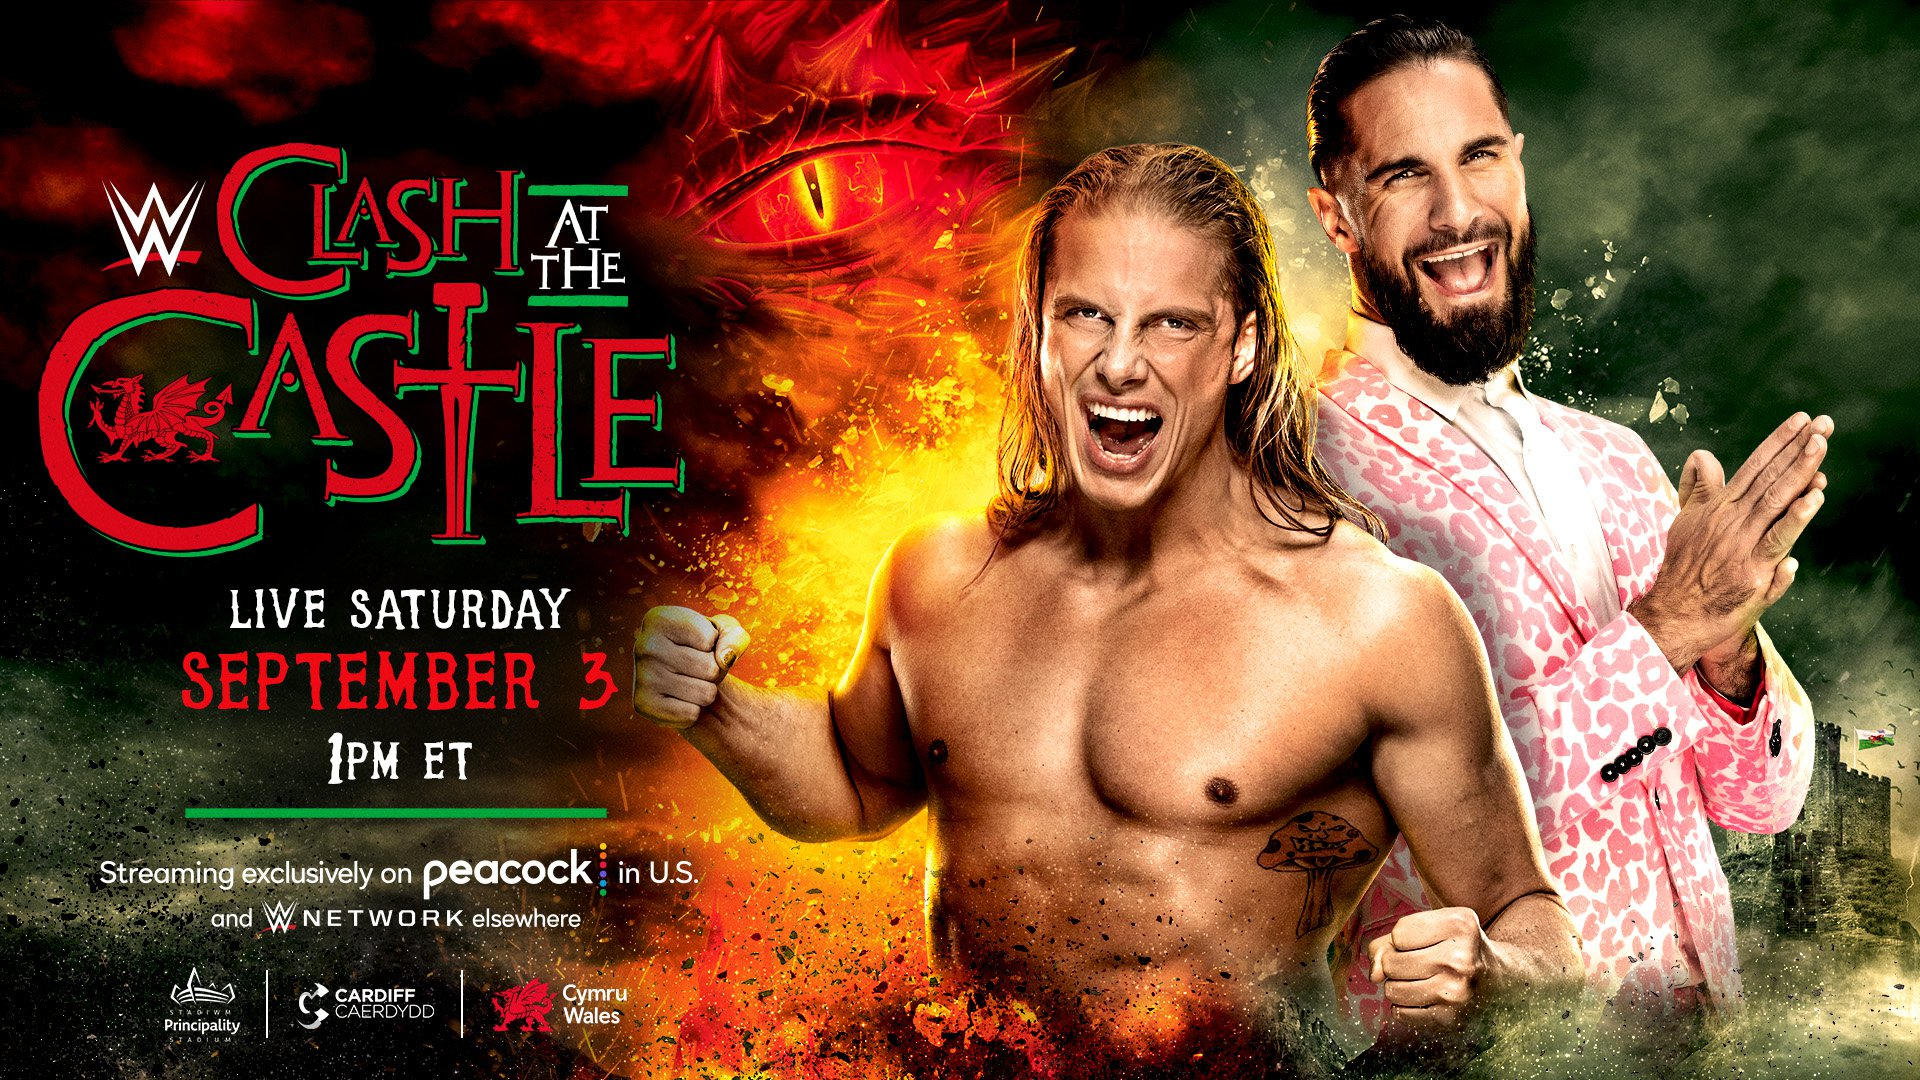 RIDDLE will face Seth Rollins at Clash at the Castle